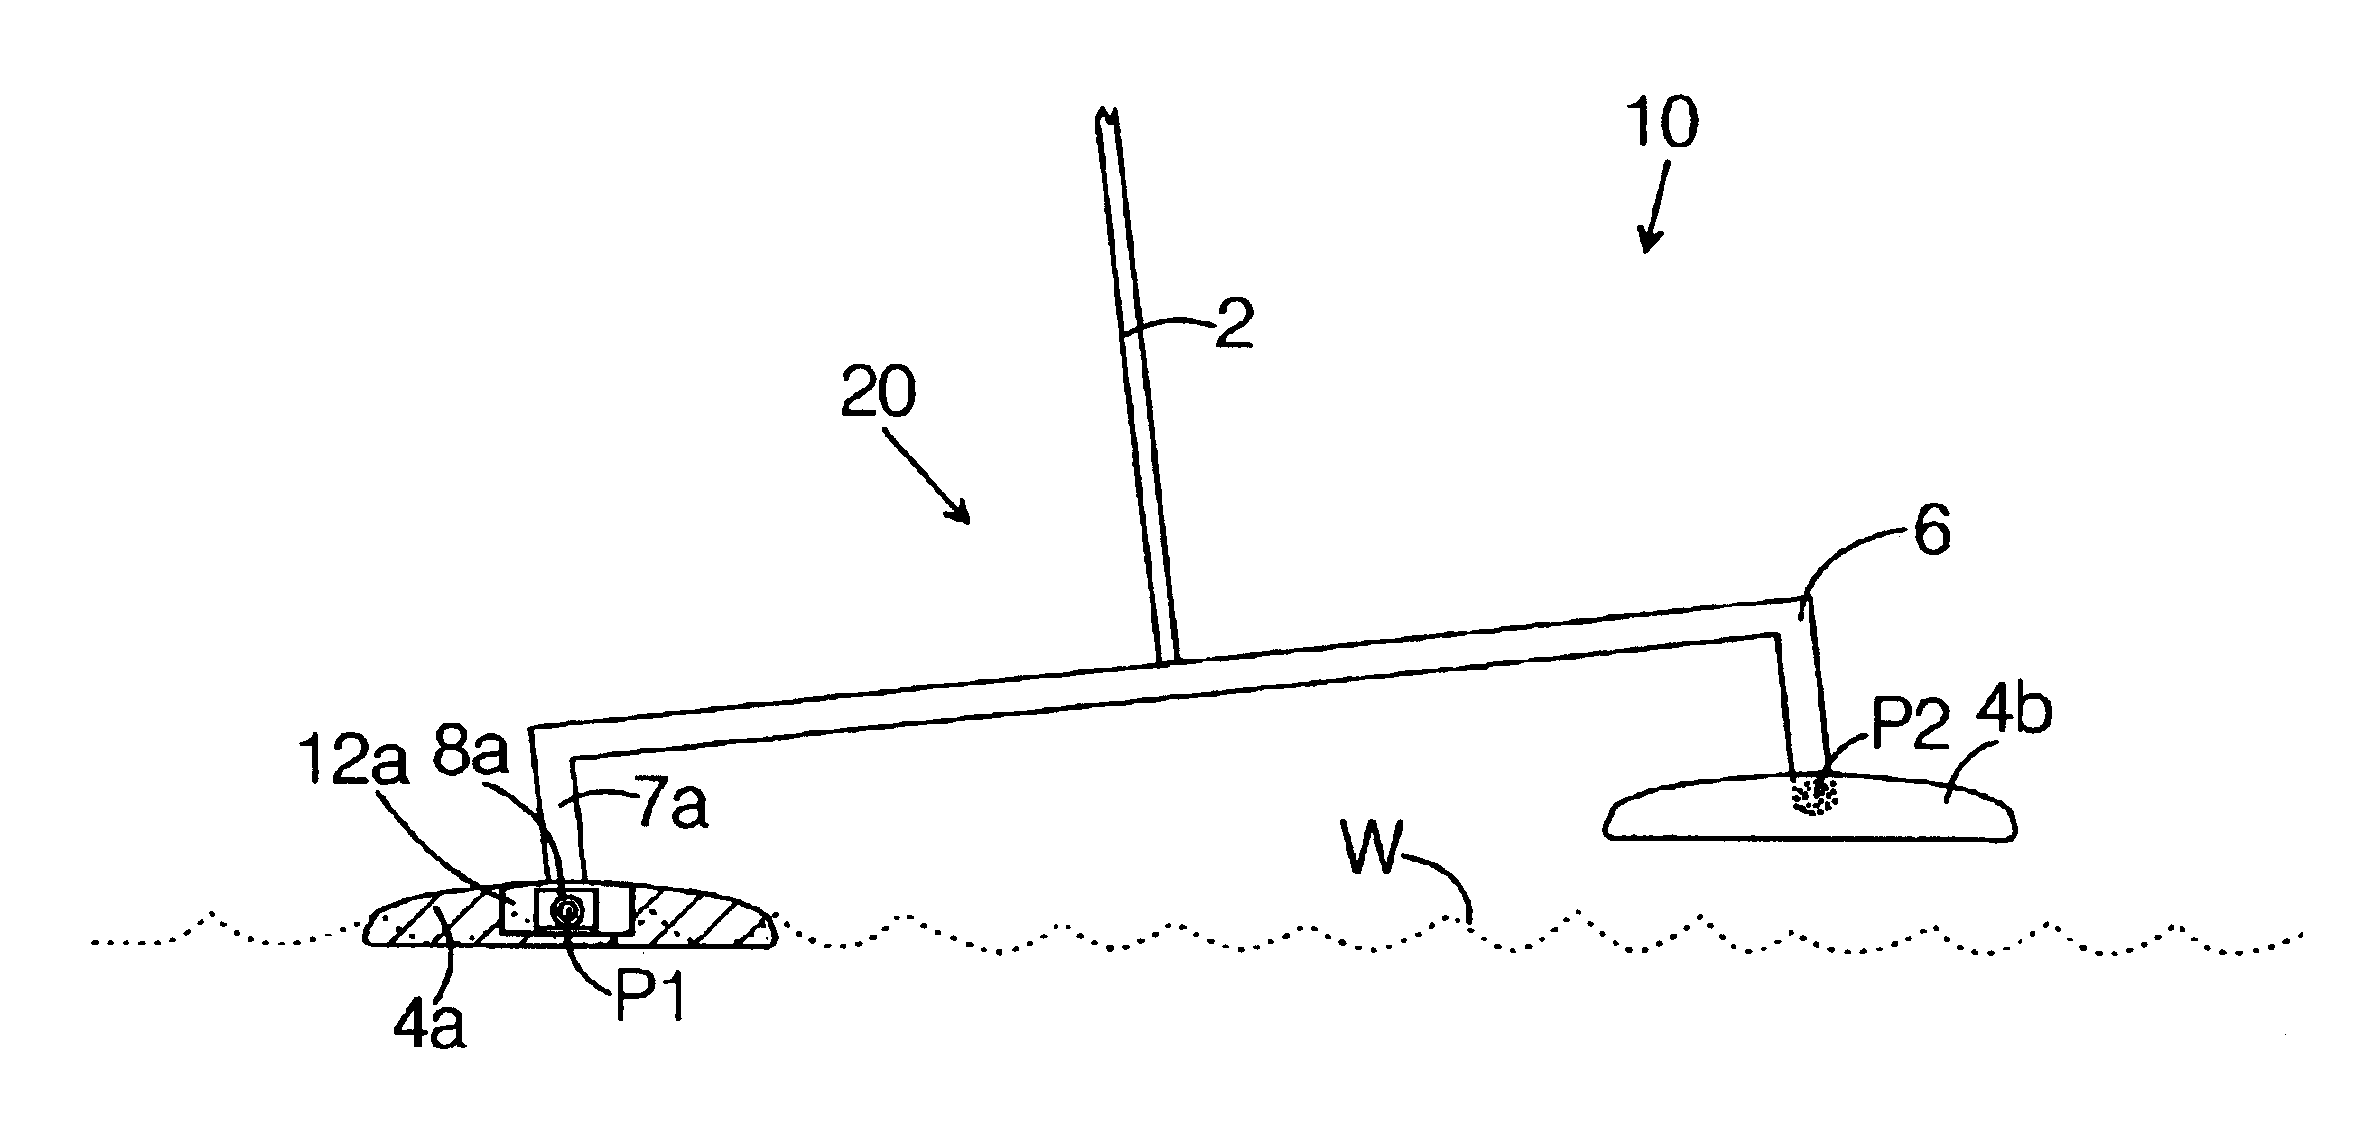 Articulated multi-hull water craft